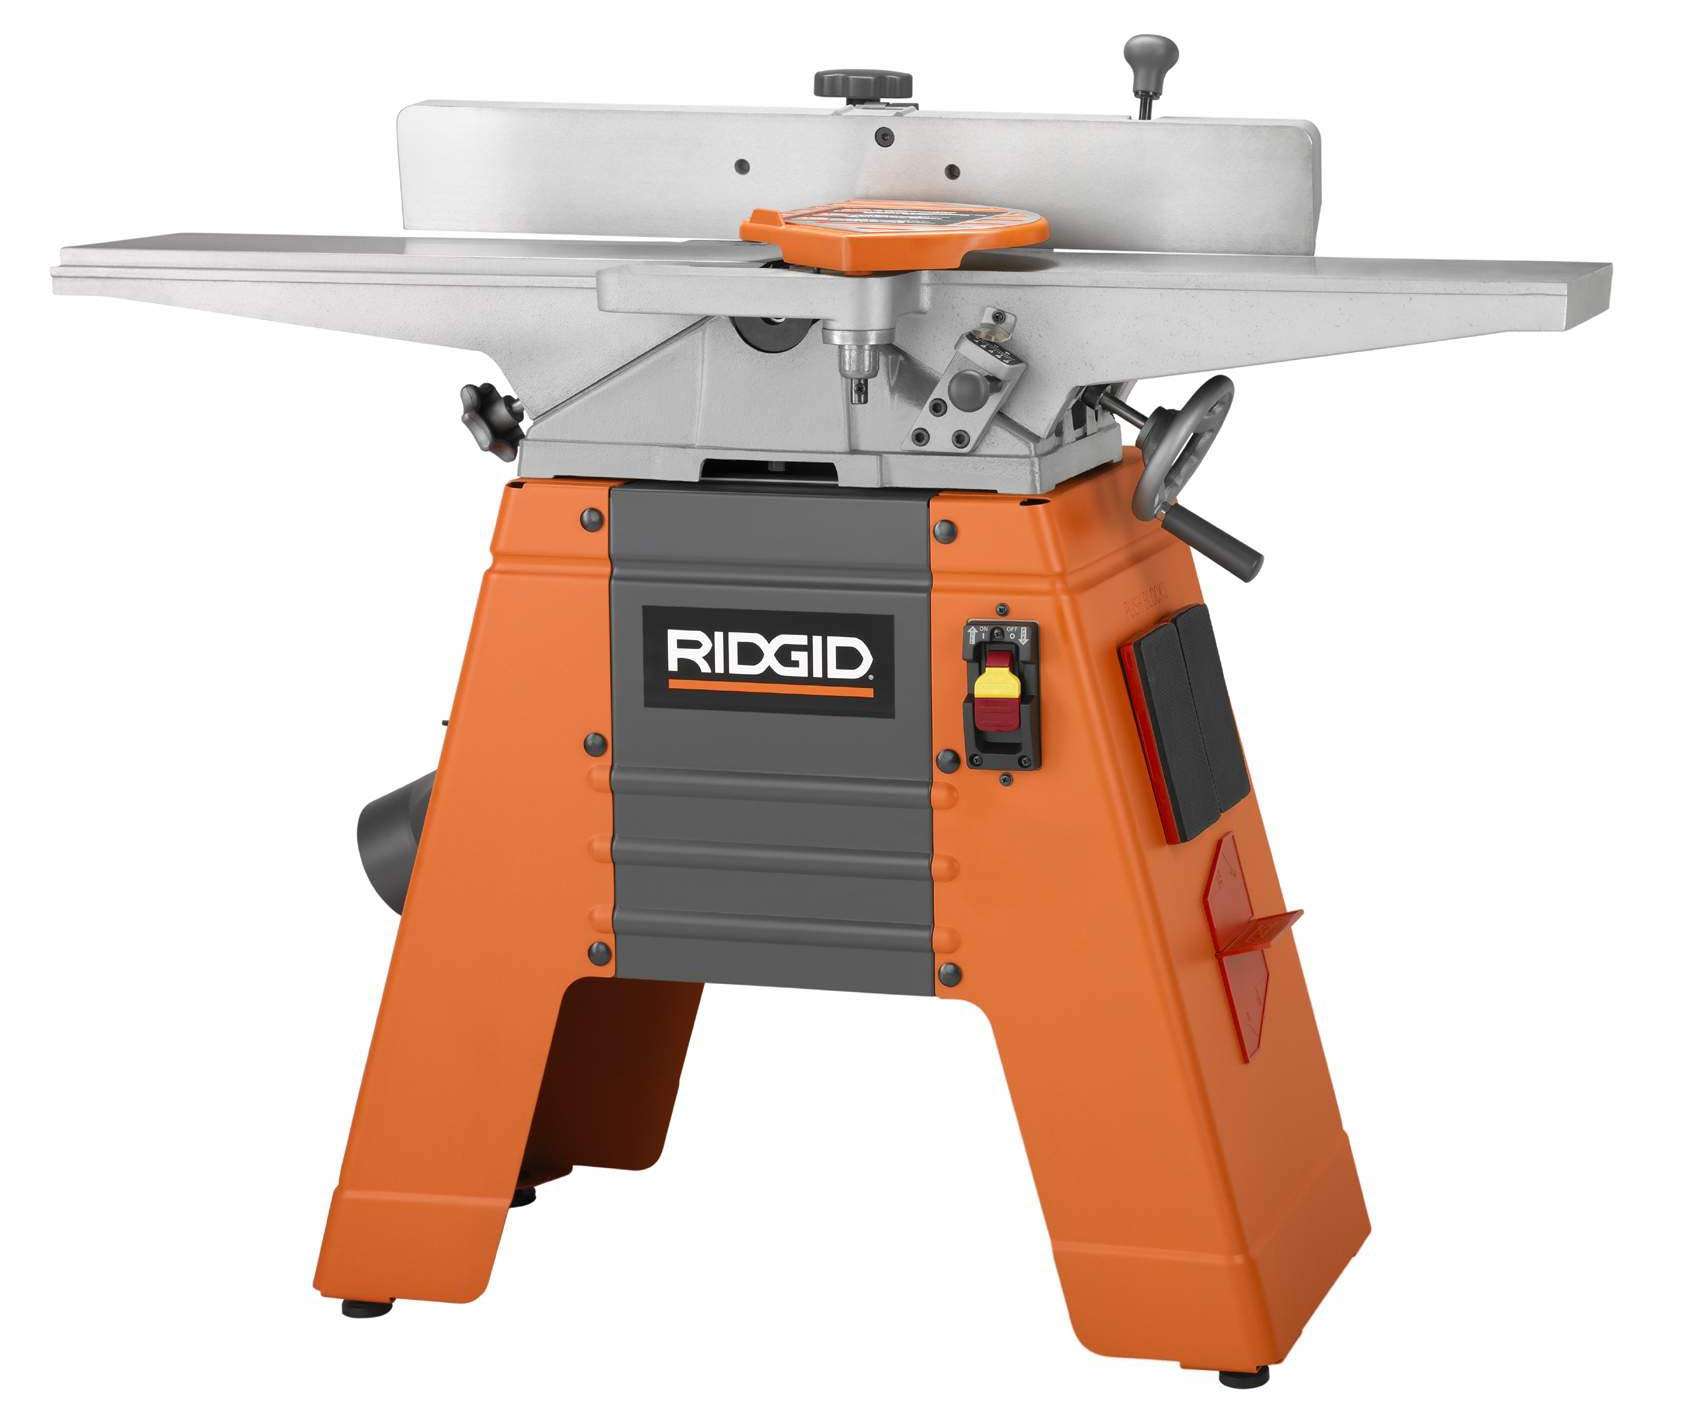 Woodworking jointer uk